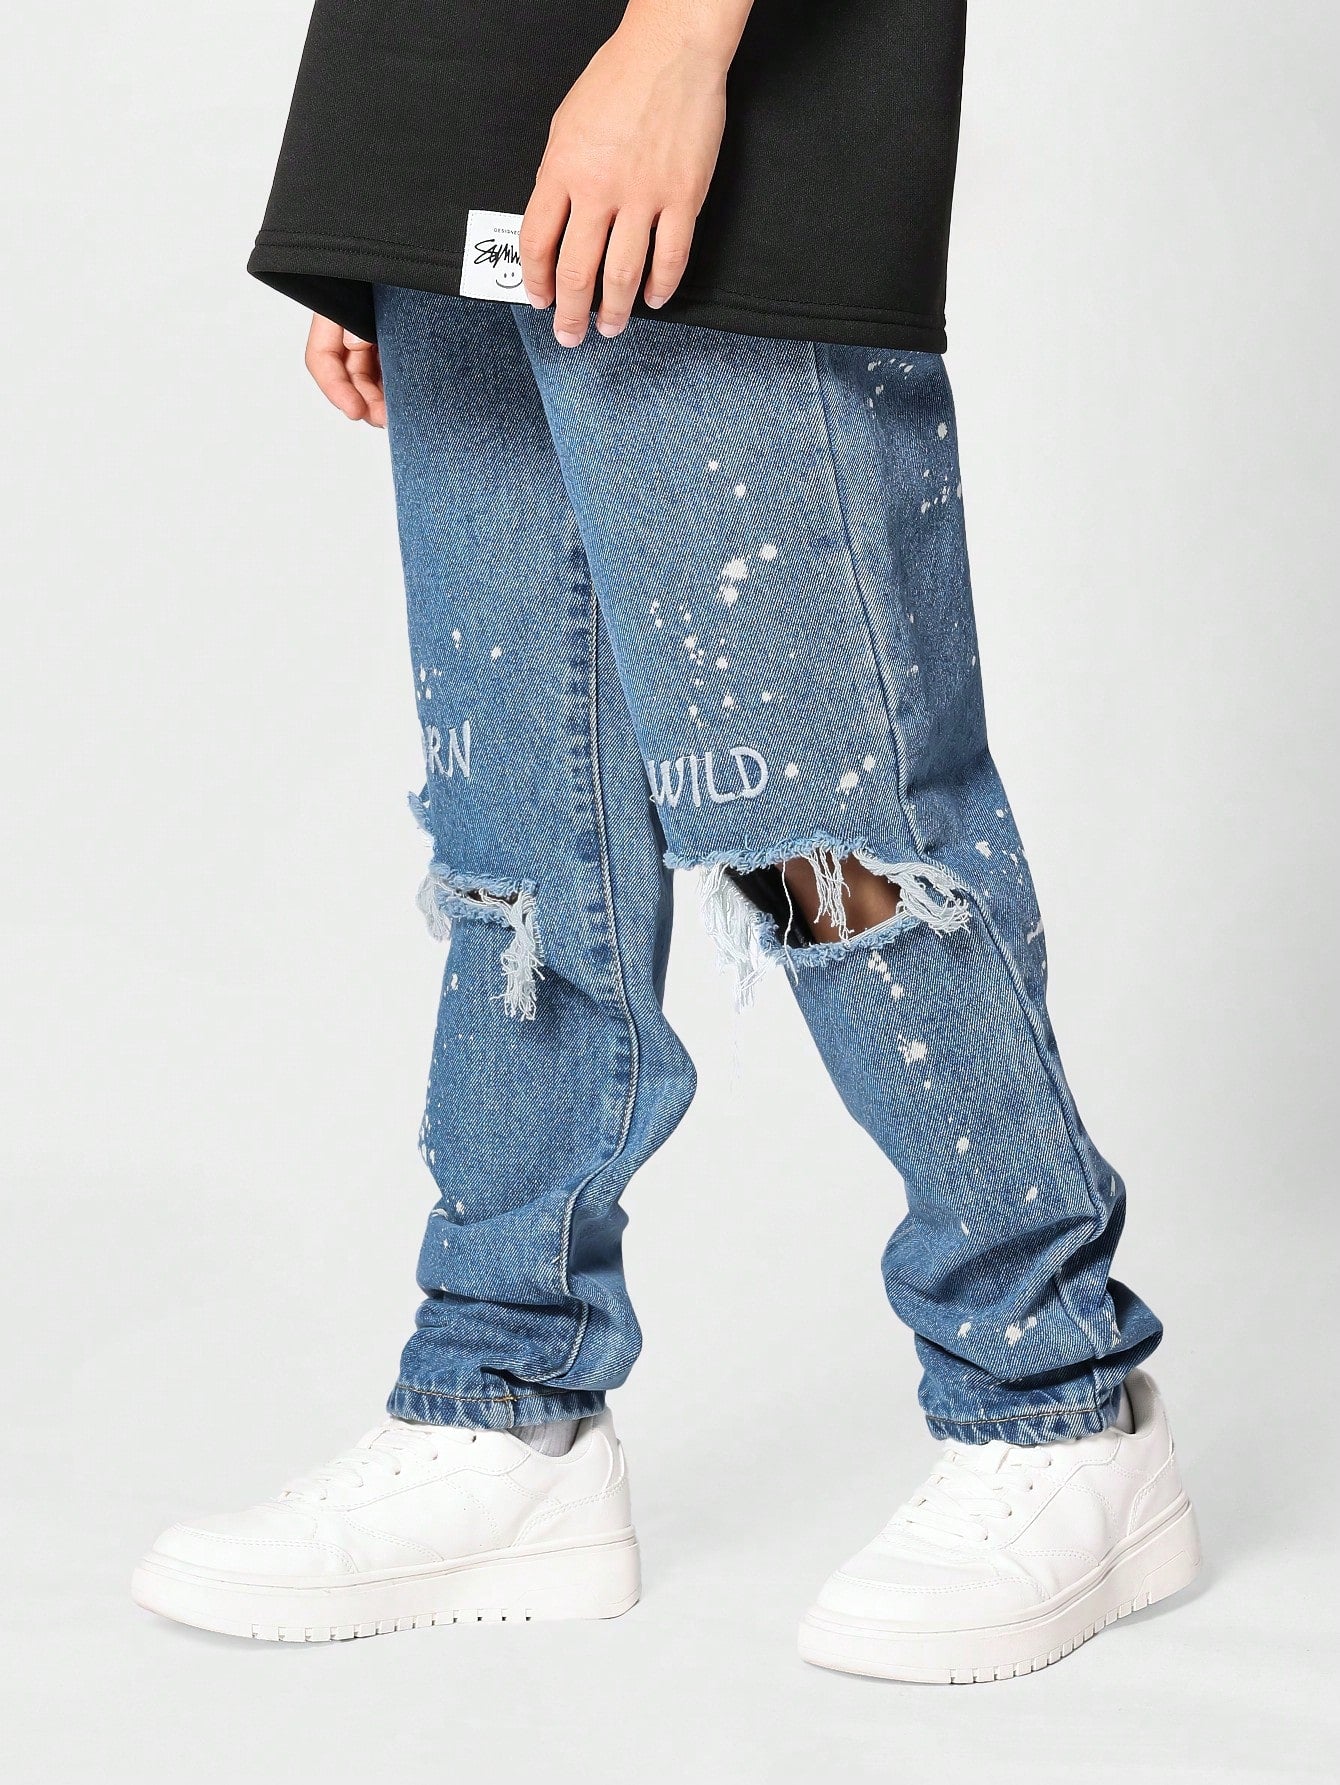 Tween Girl Embroidery Letter Pattern Ripped Jeans Back To School